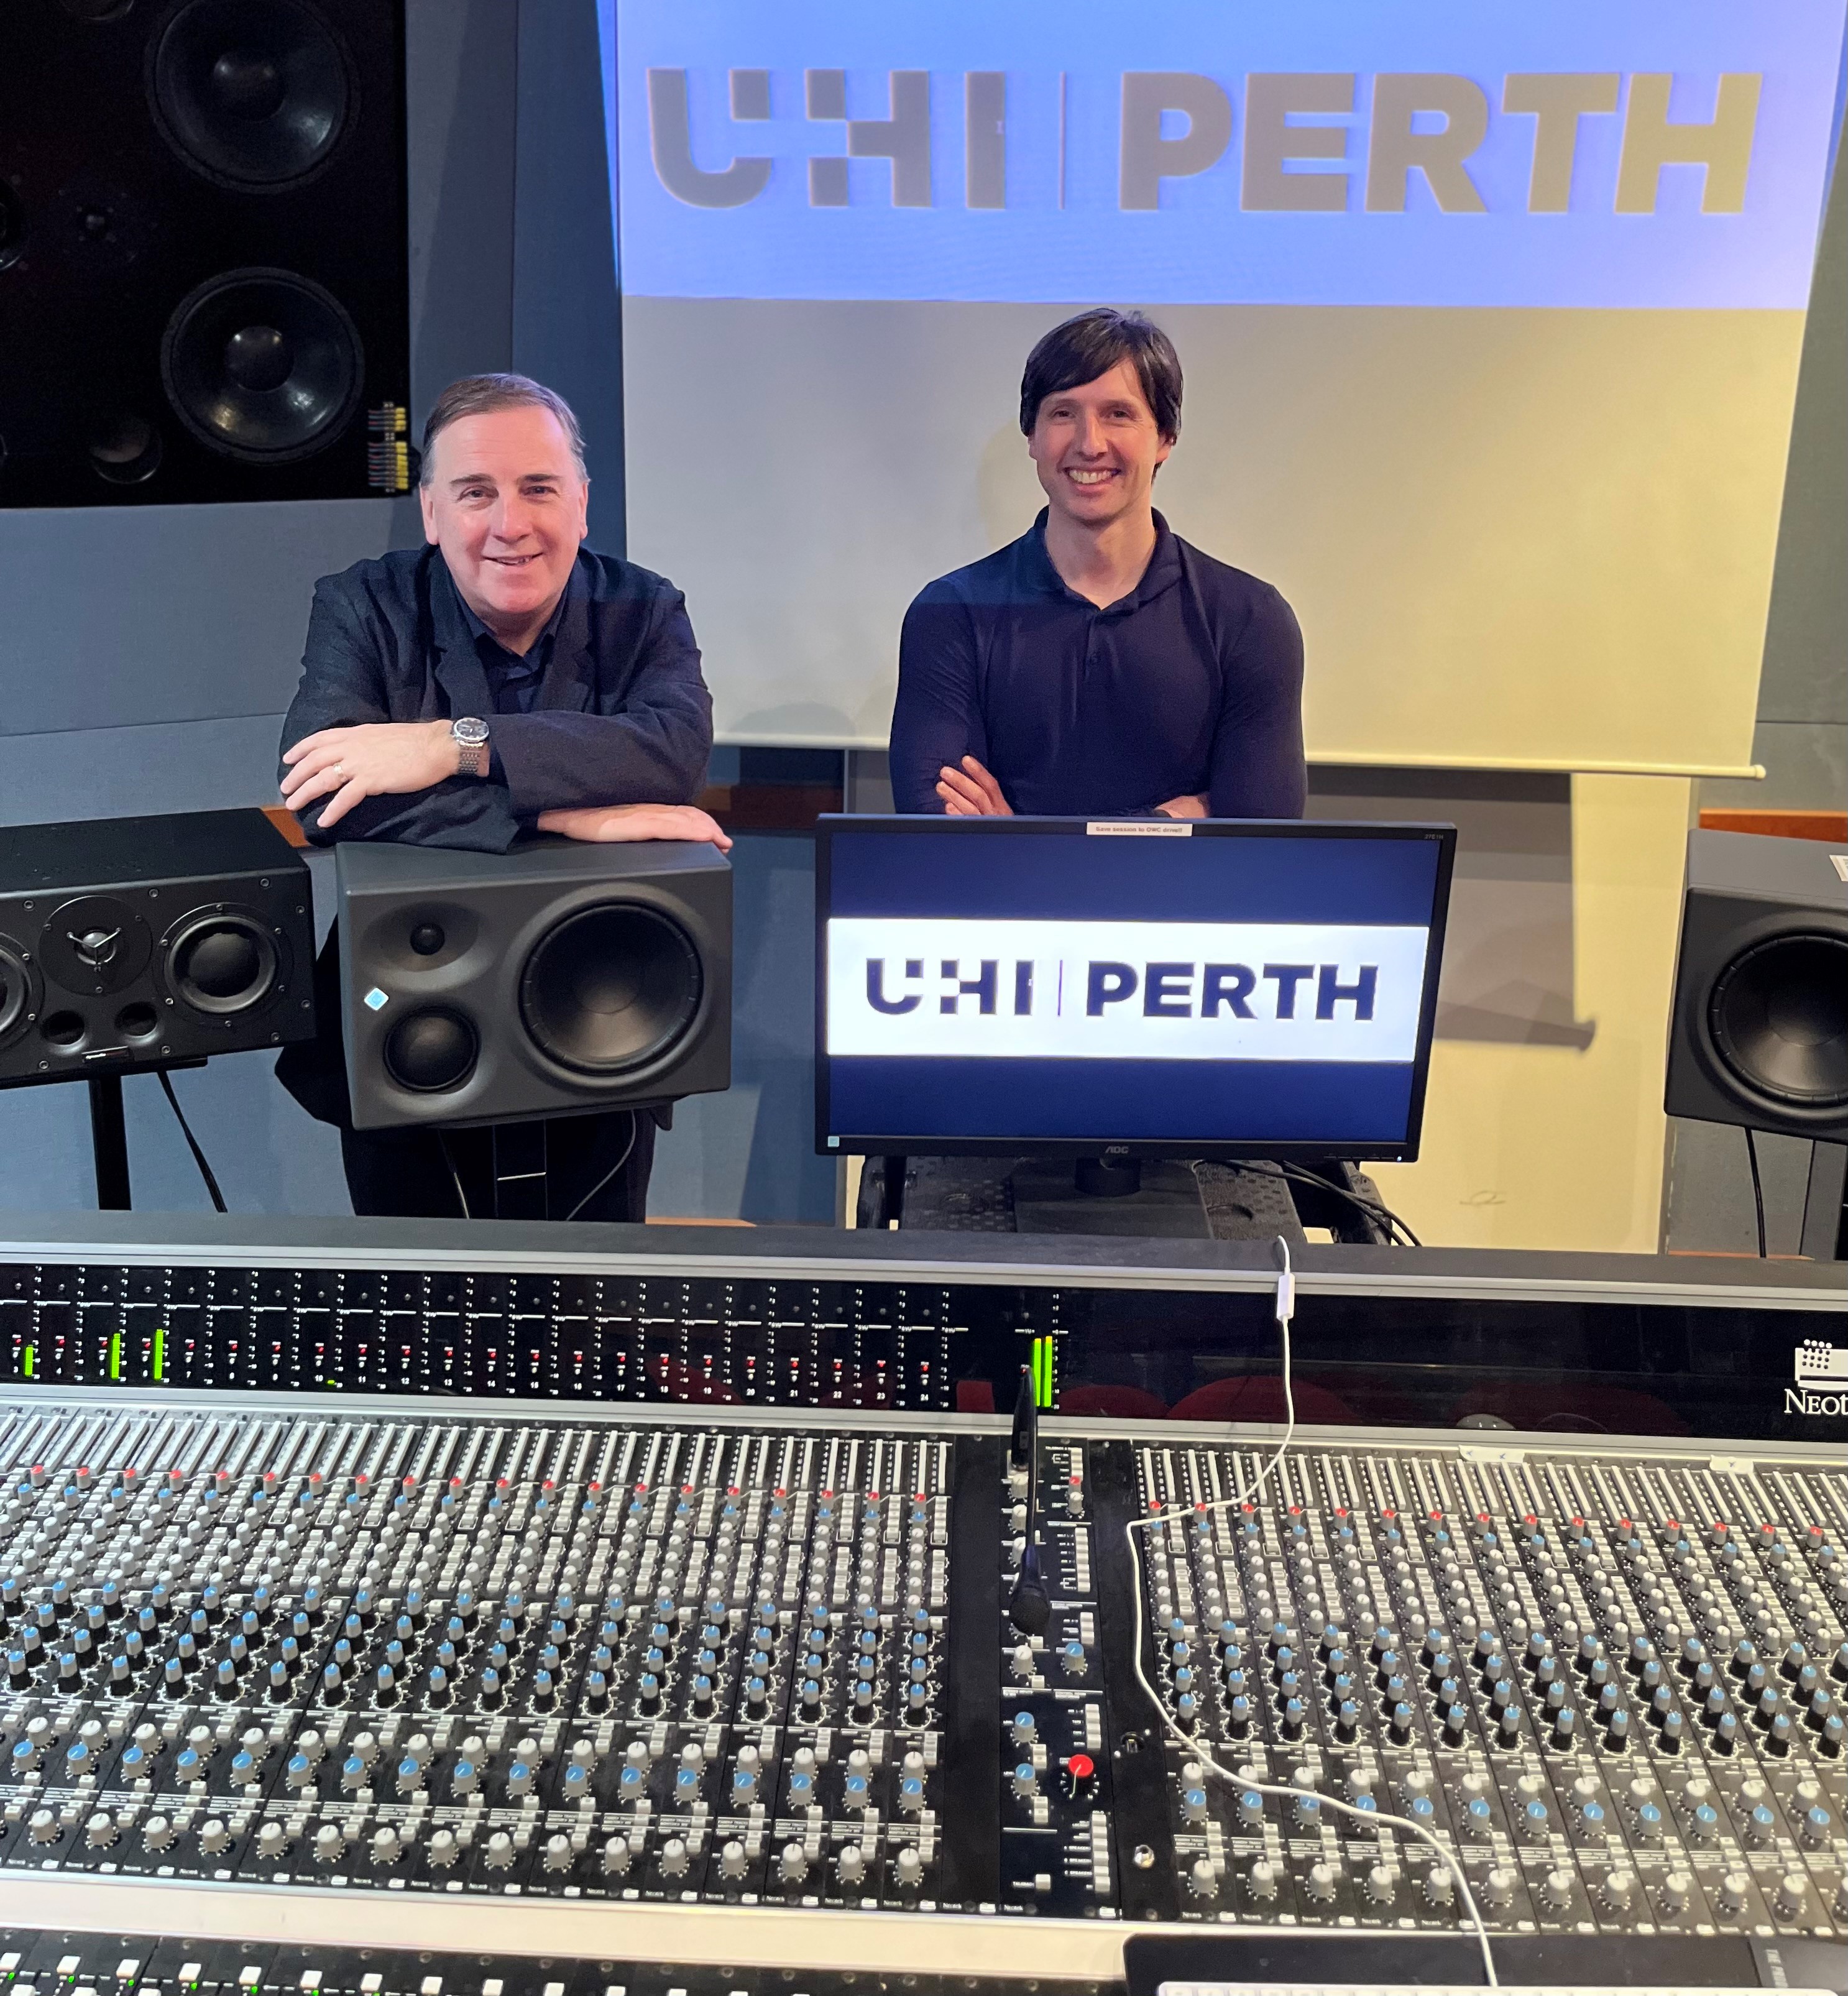 New partnership will help make UHI Perth music students’ industry-ready